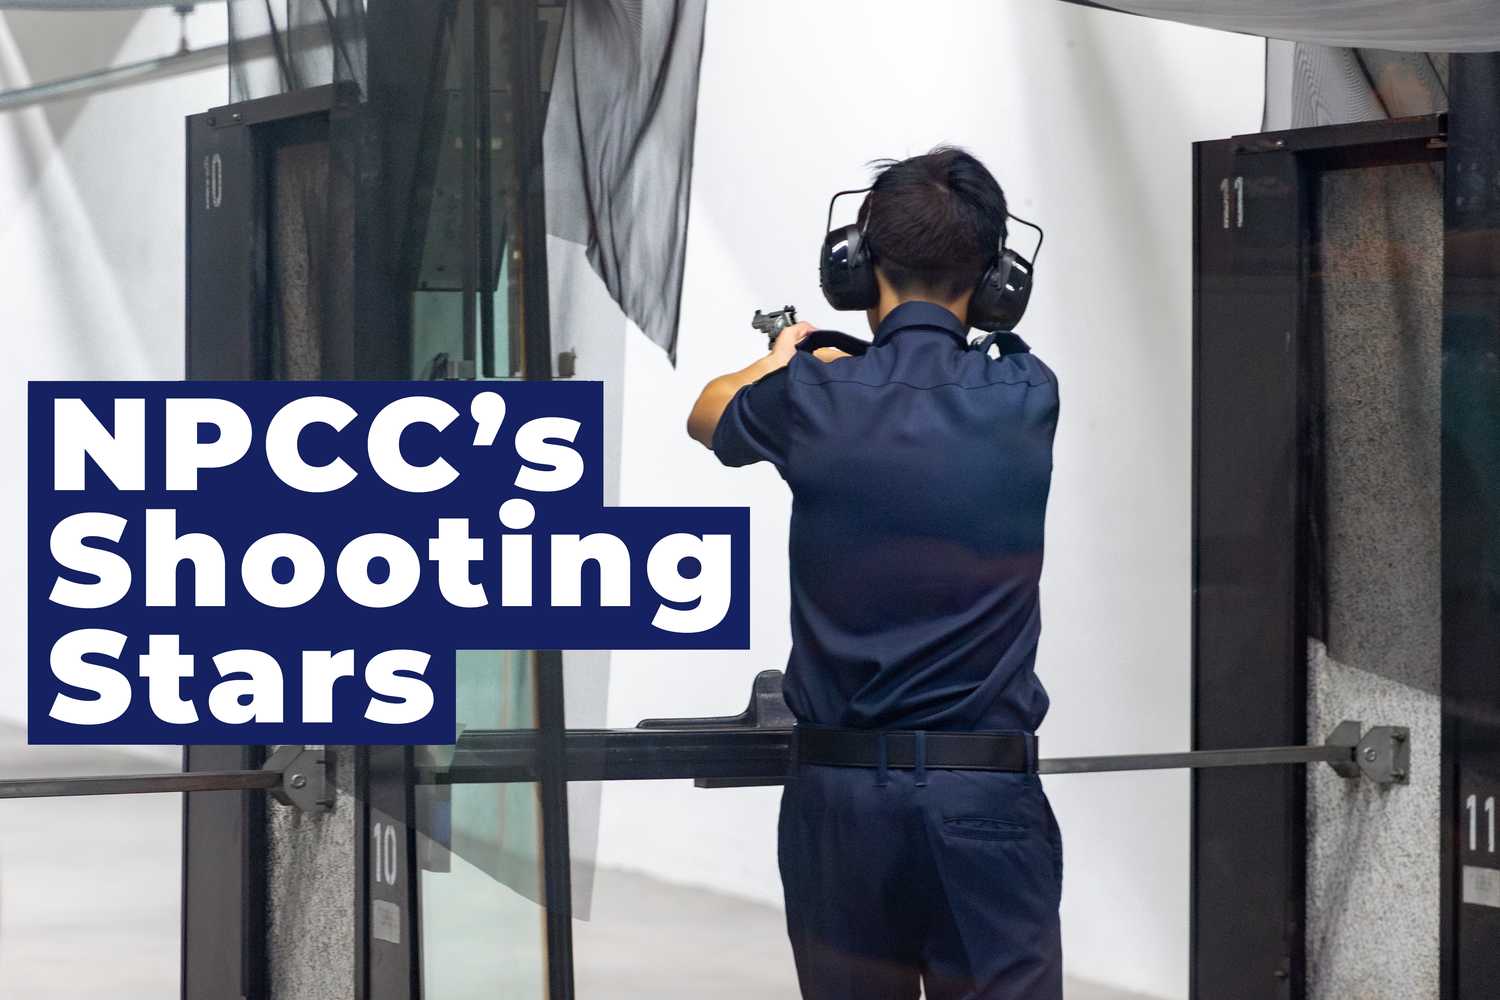 Preview photo, male NPCC Cadet shooting at the target in the range, the article title NPCC's Shooting Stars header in white and navy blue. 